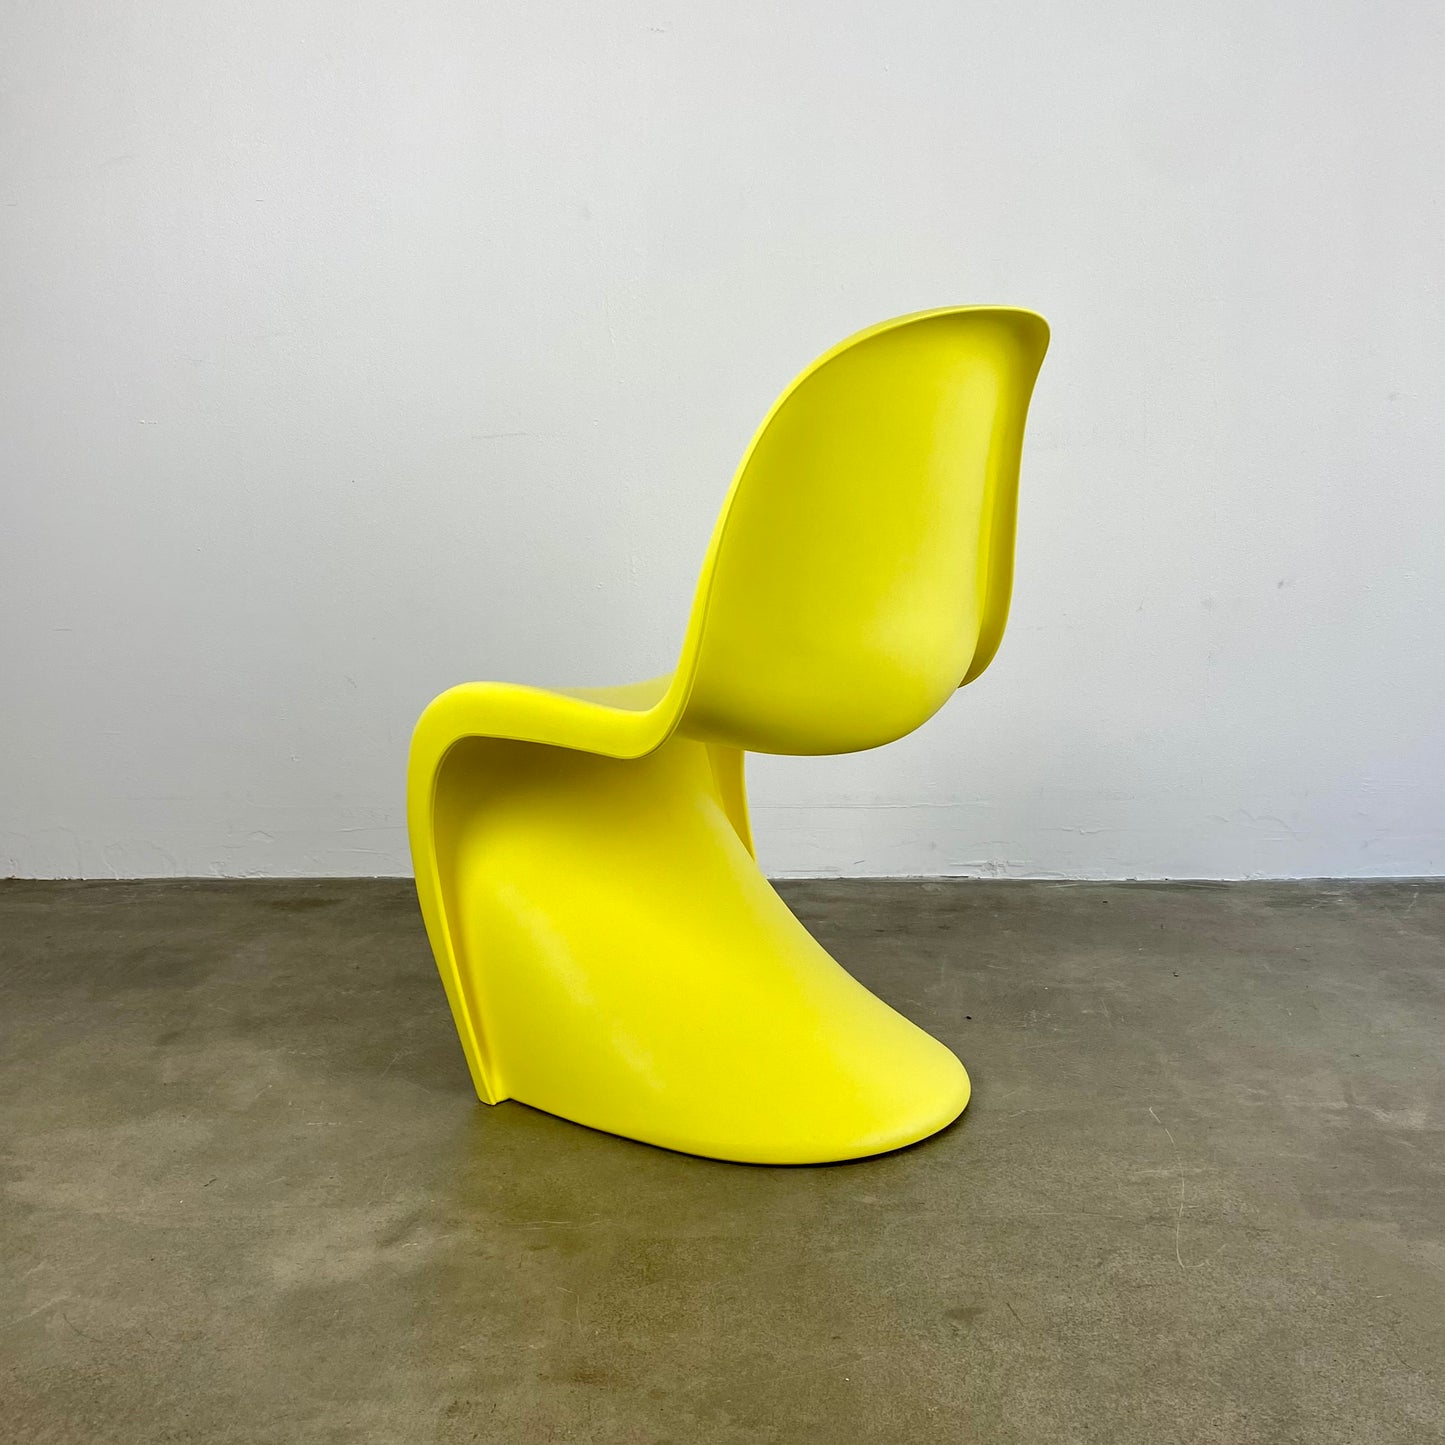 The panton chair for Vitra